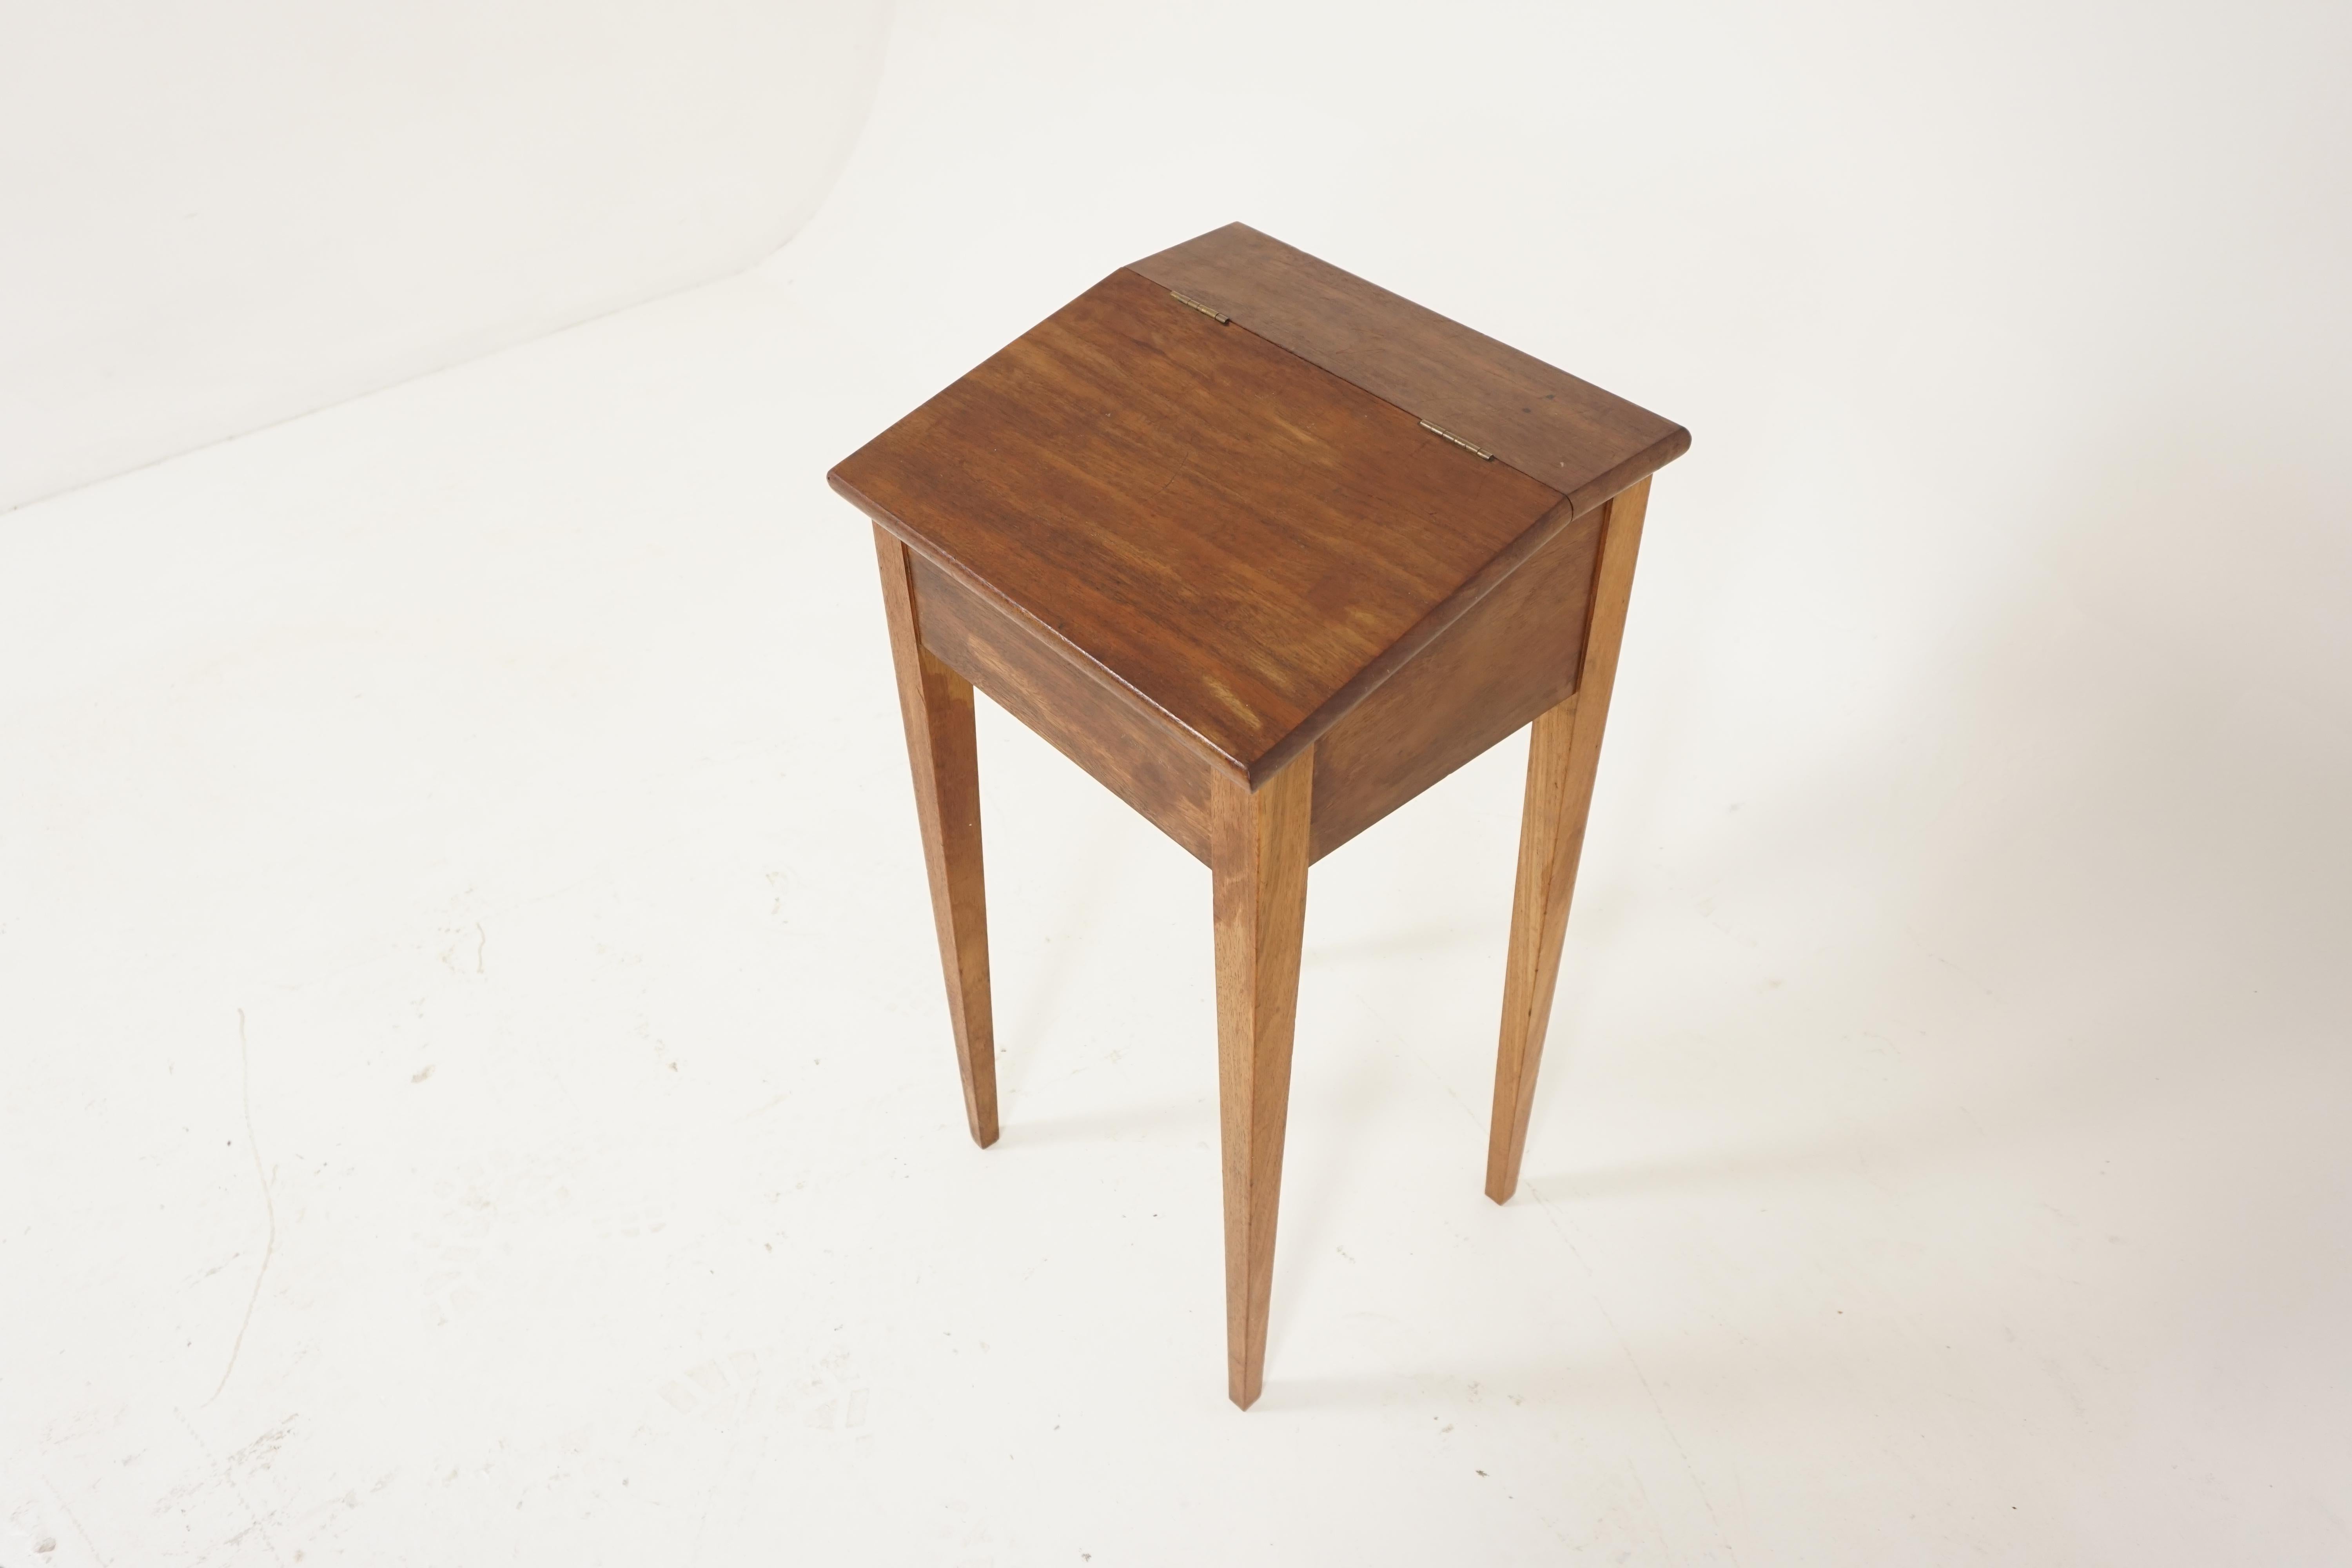 Vintage walnut slope-front child's desk, Scotland, 1940s, B1902

Scotland, 1940s
Solid walnut
Original finish
Slope-front writing surface
Lift-up lid with storage inside
Standing on four tall tapered legs
Good